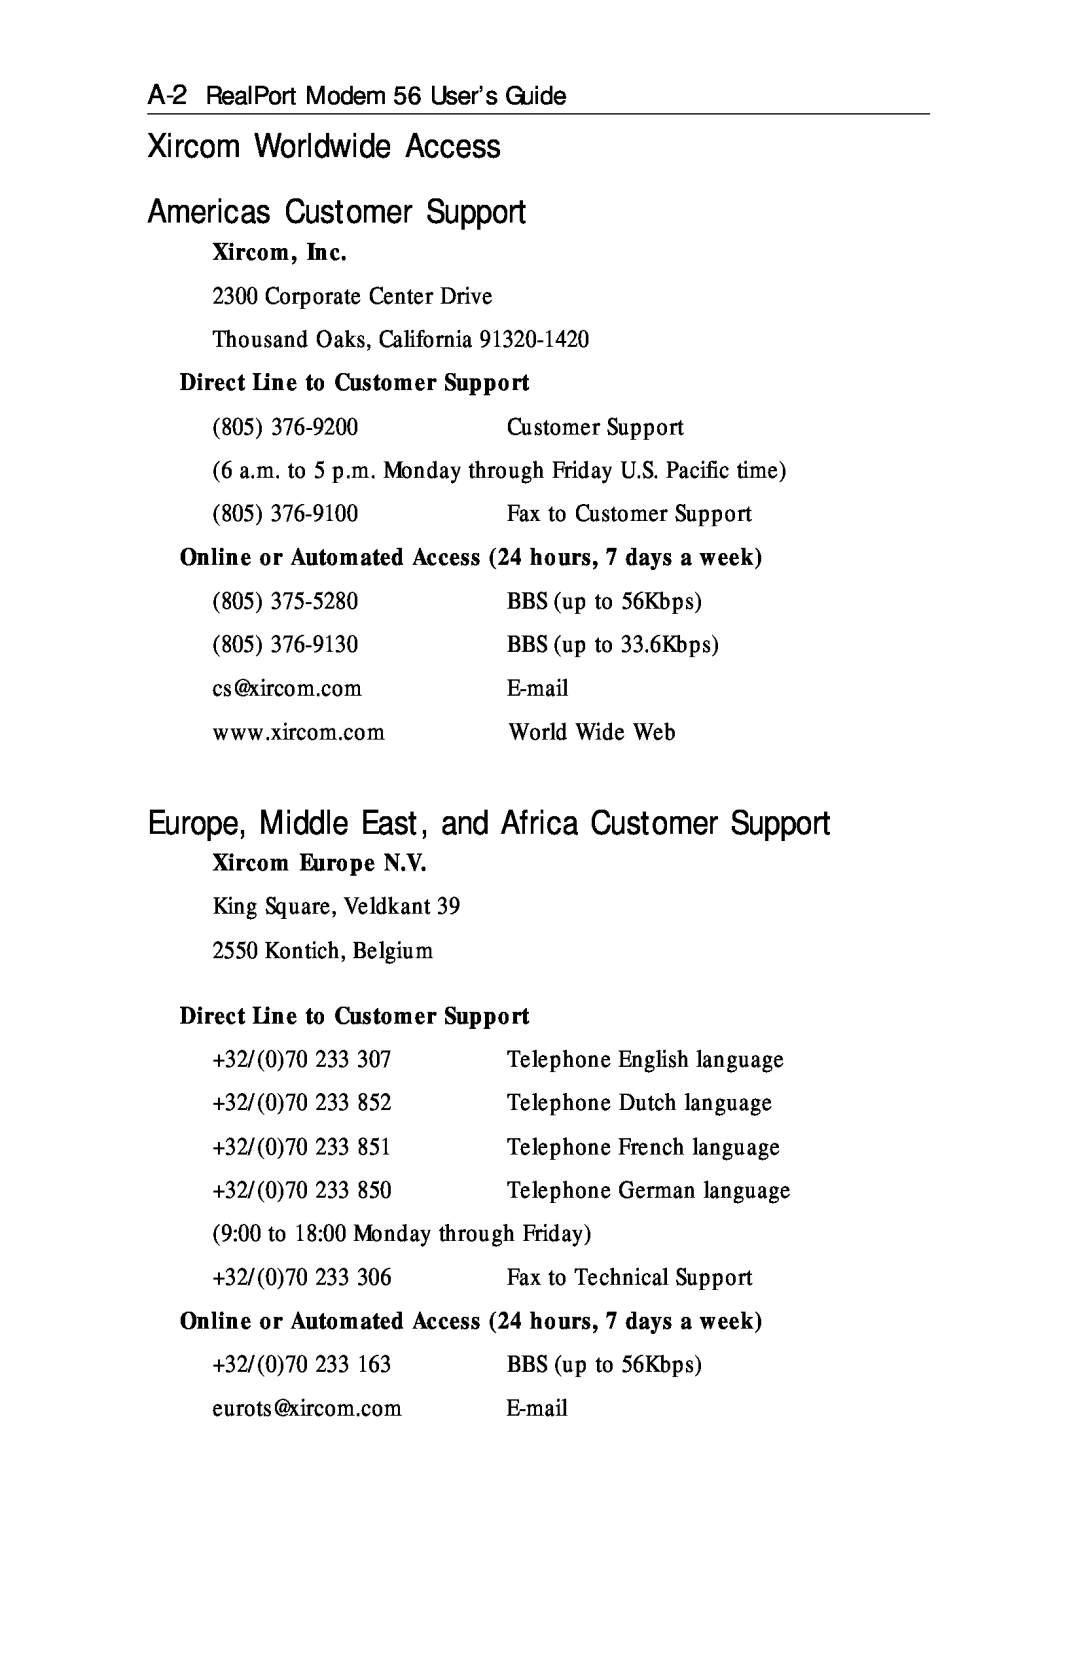 Xircom RM56V1 manual Xircom Worldwide Access Americas Customer Support, Europe, Middle East, and Africa Customer Support 